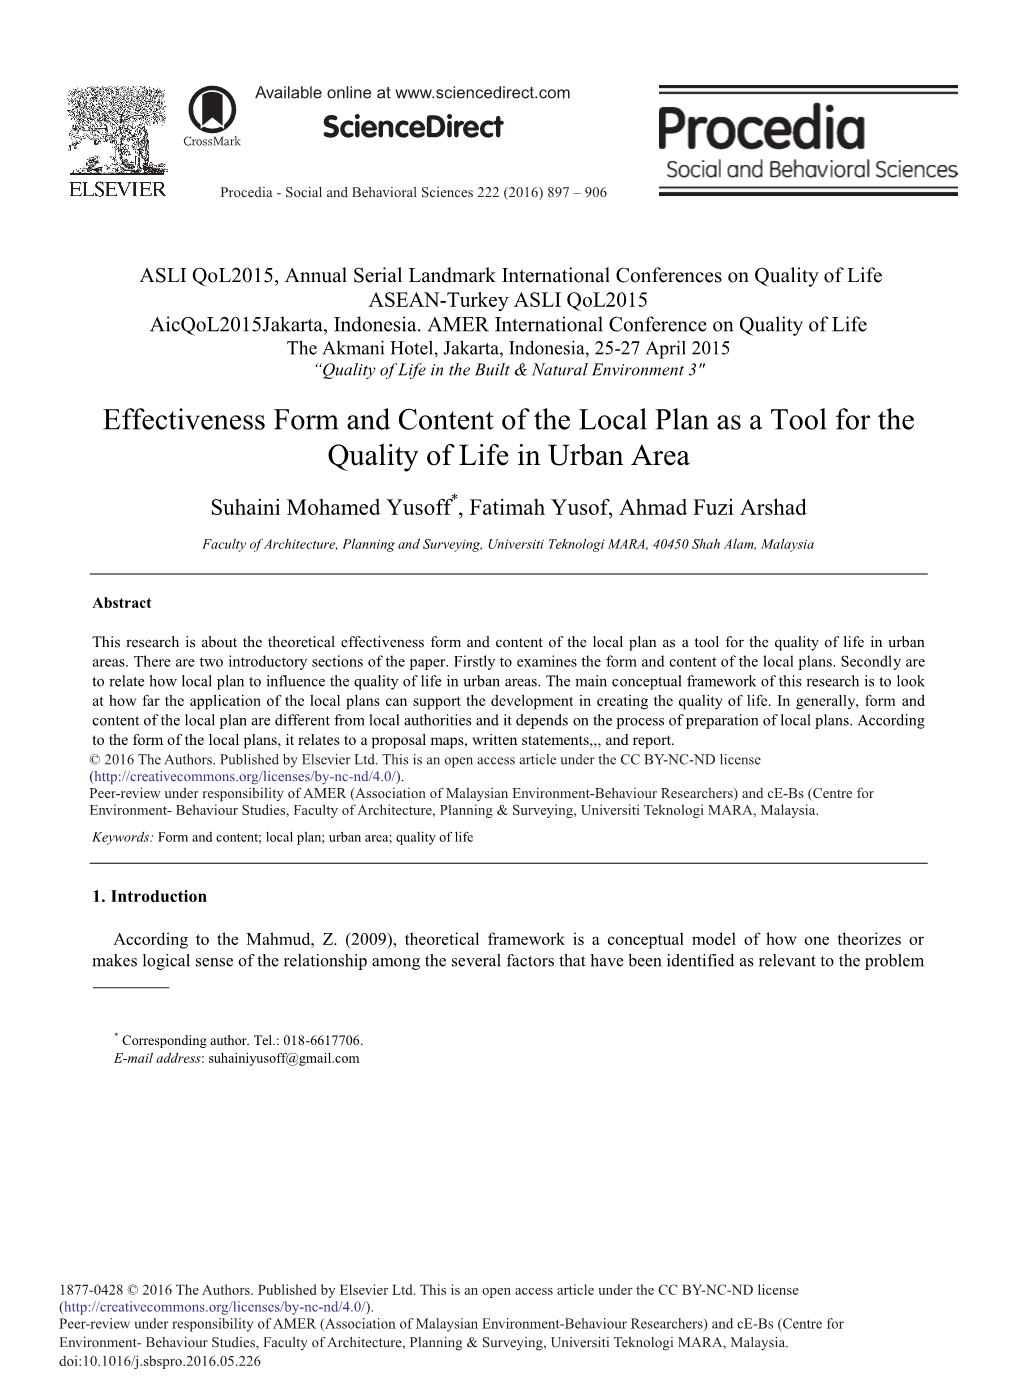 Effectiveness Form and Content of the Local Plan As a Tool for the Quality of Life in Urban Area